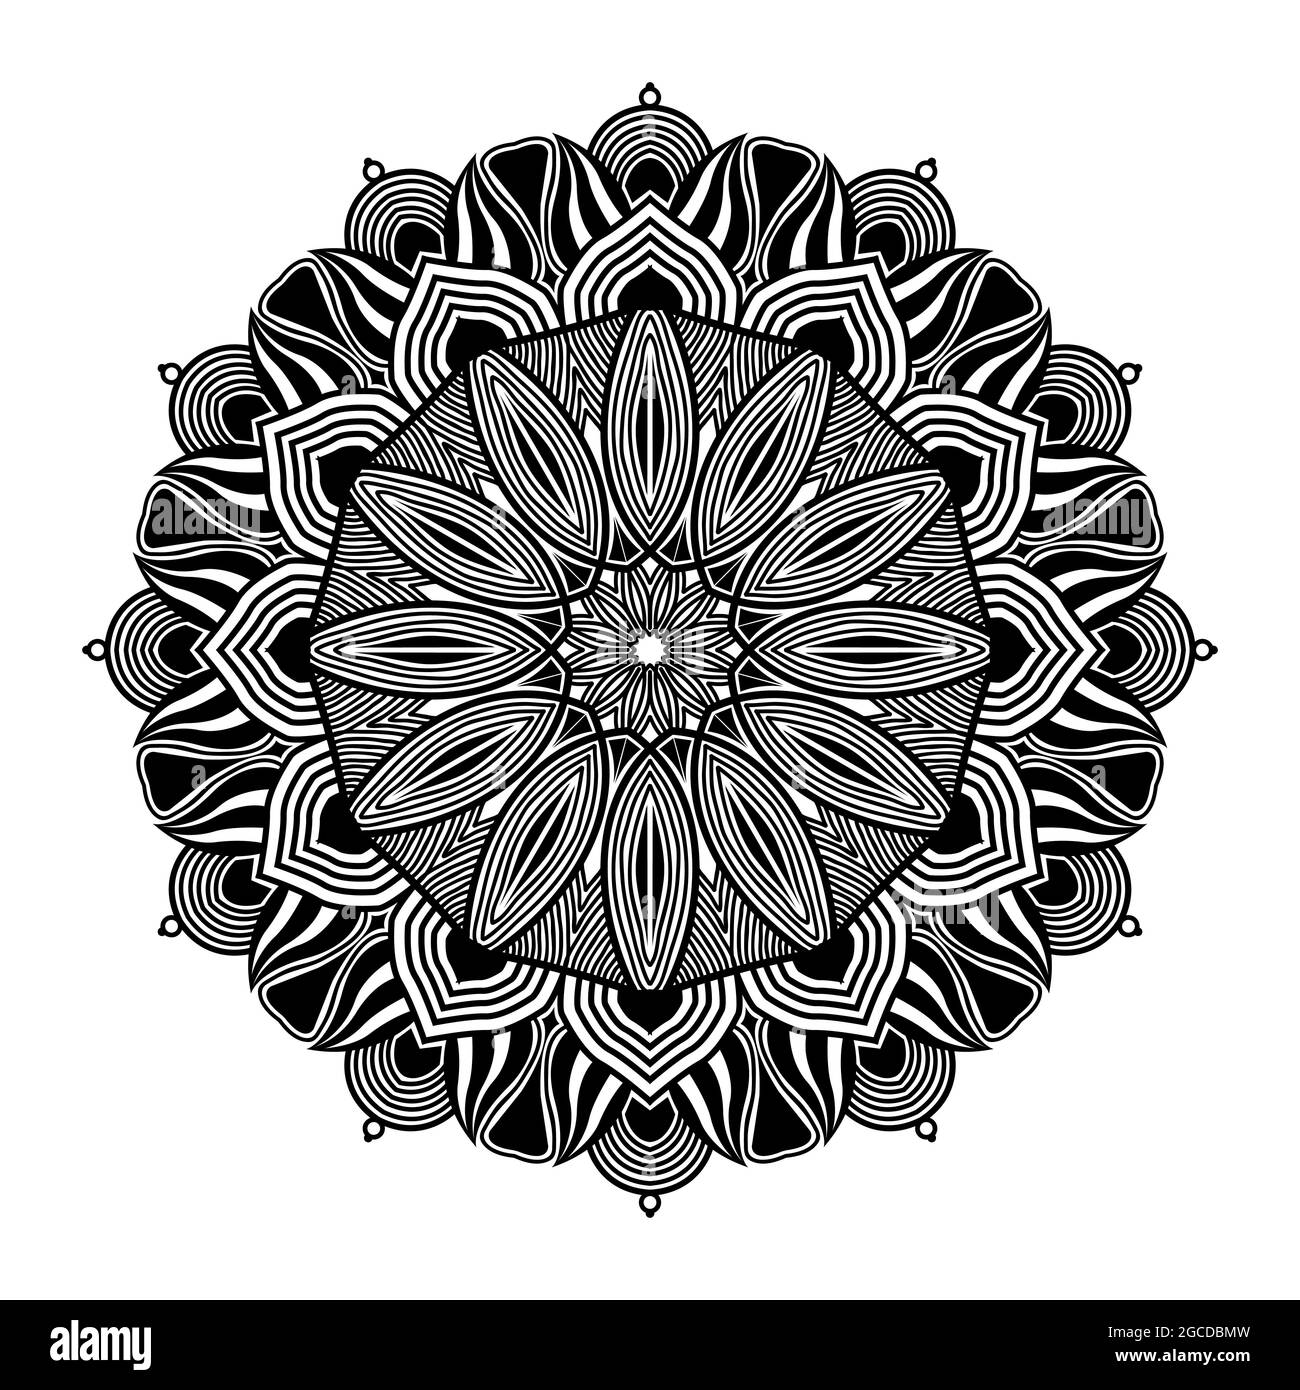 abstract mandala circle pattern background with line art decorative vector background design Stock Vector